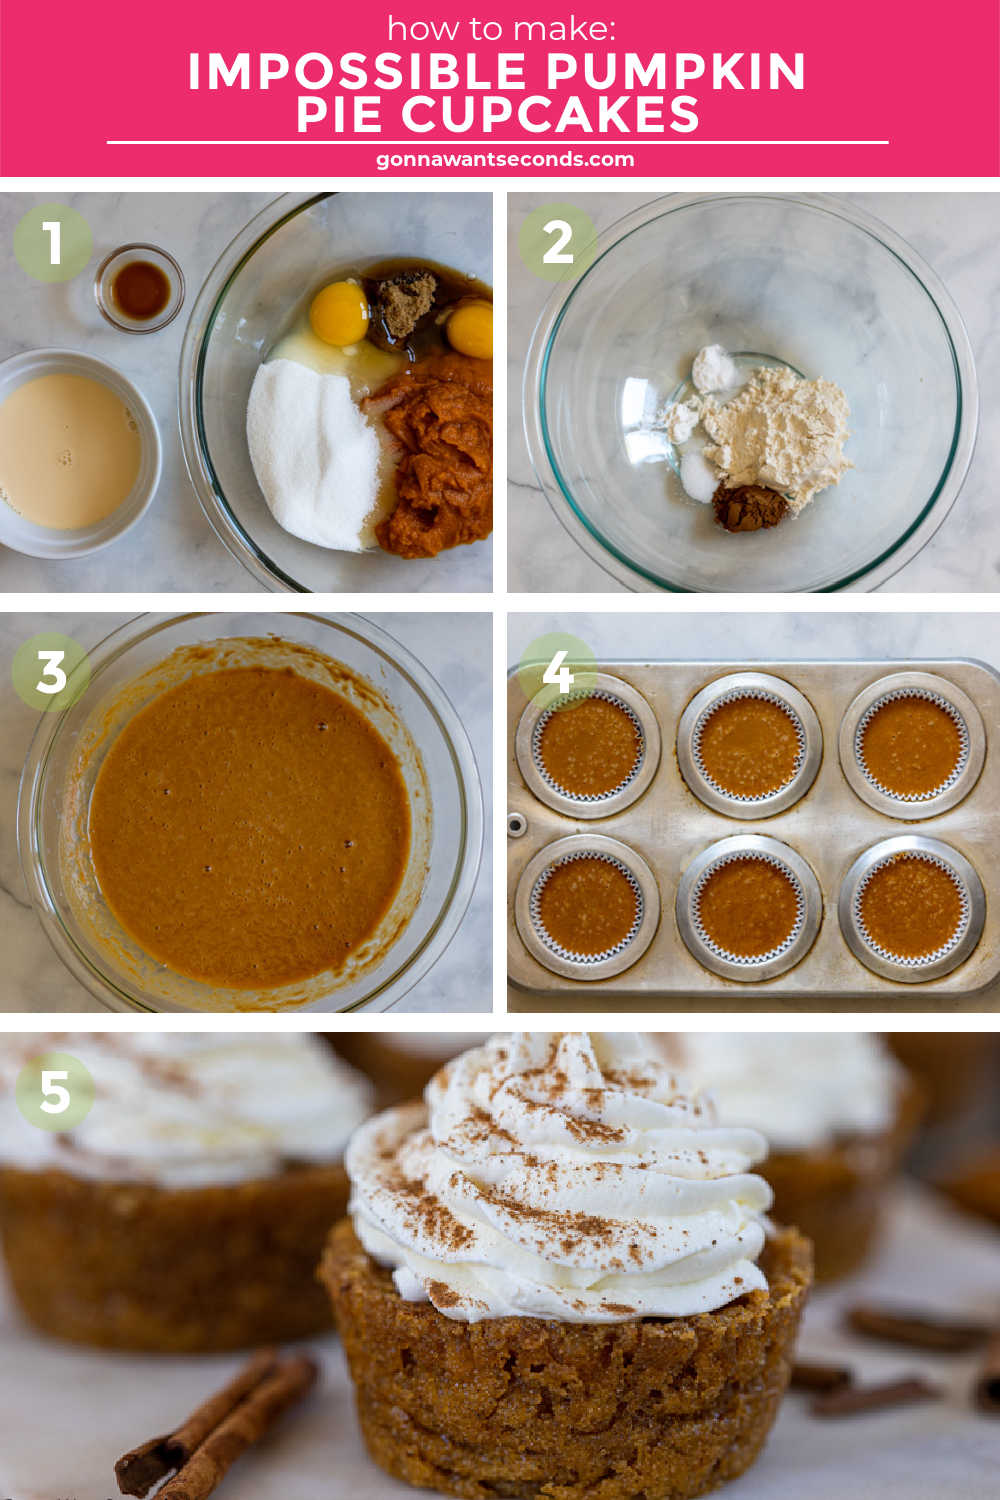 Step by step How to make Impossible Pumpkin Pie Cupcakes